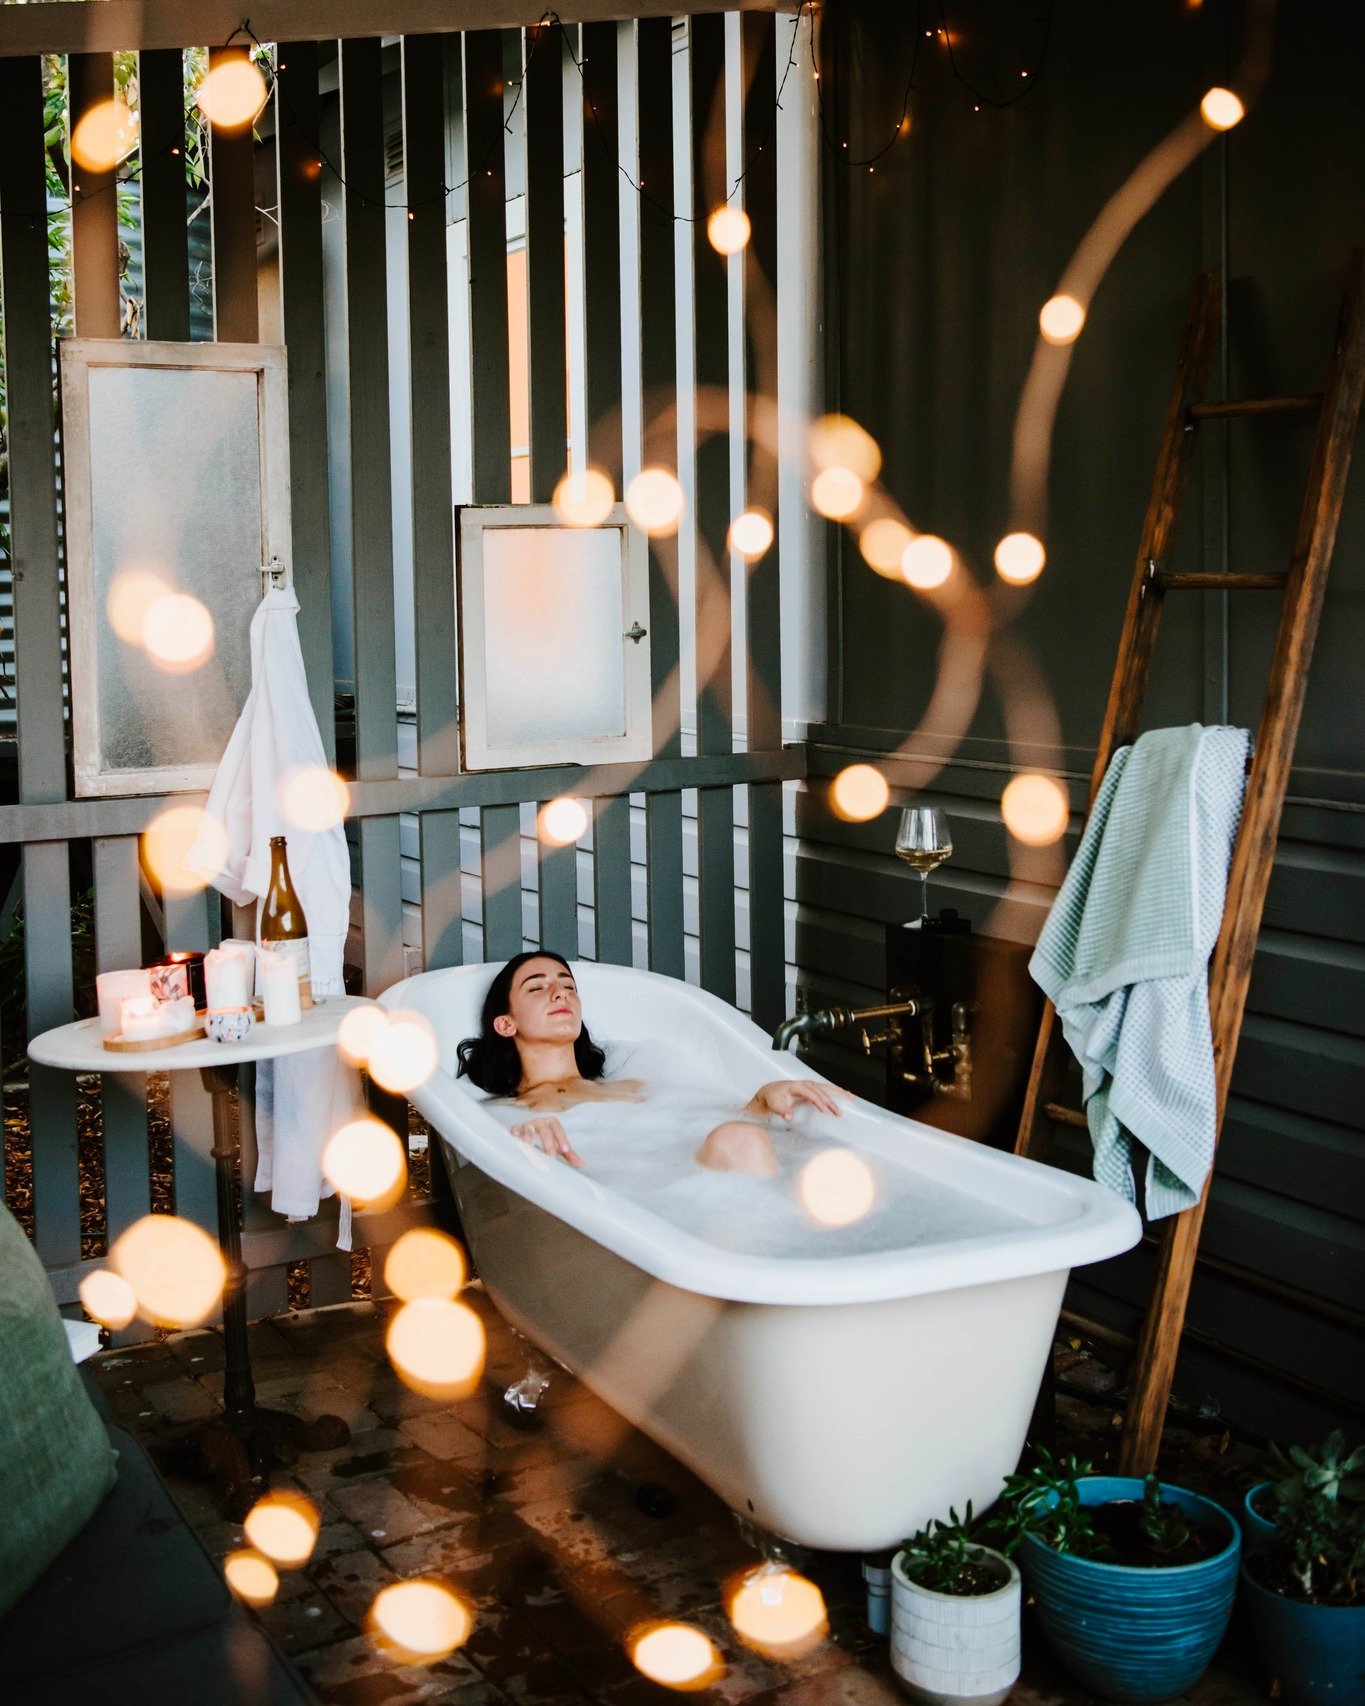 Sunday self-care vibes ✨ Save this post for inspo for planning your own Mudgee wellness retreat, featuring dreamy baths to soak the stress away, snuggling up by an outdoor fire, lazy days spent relaxing &amp; a much-needed dose of nature 🍃
 
 
 
 
 